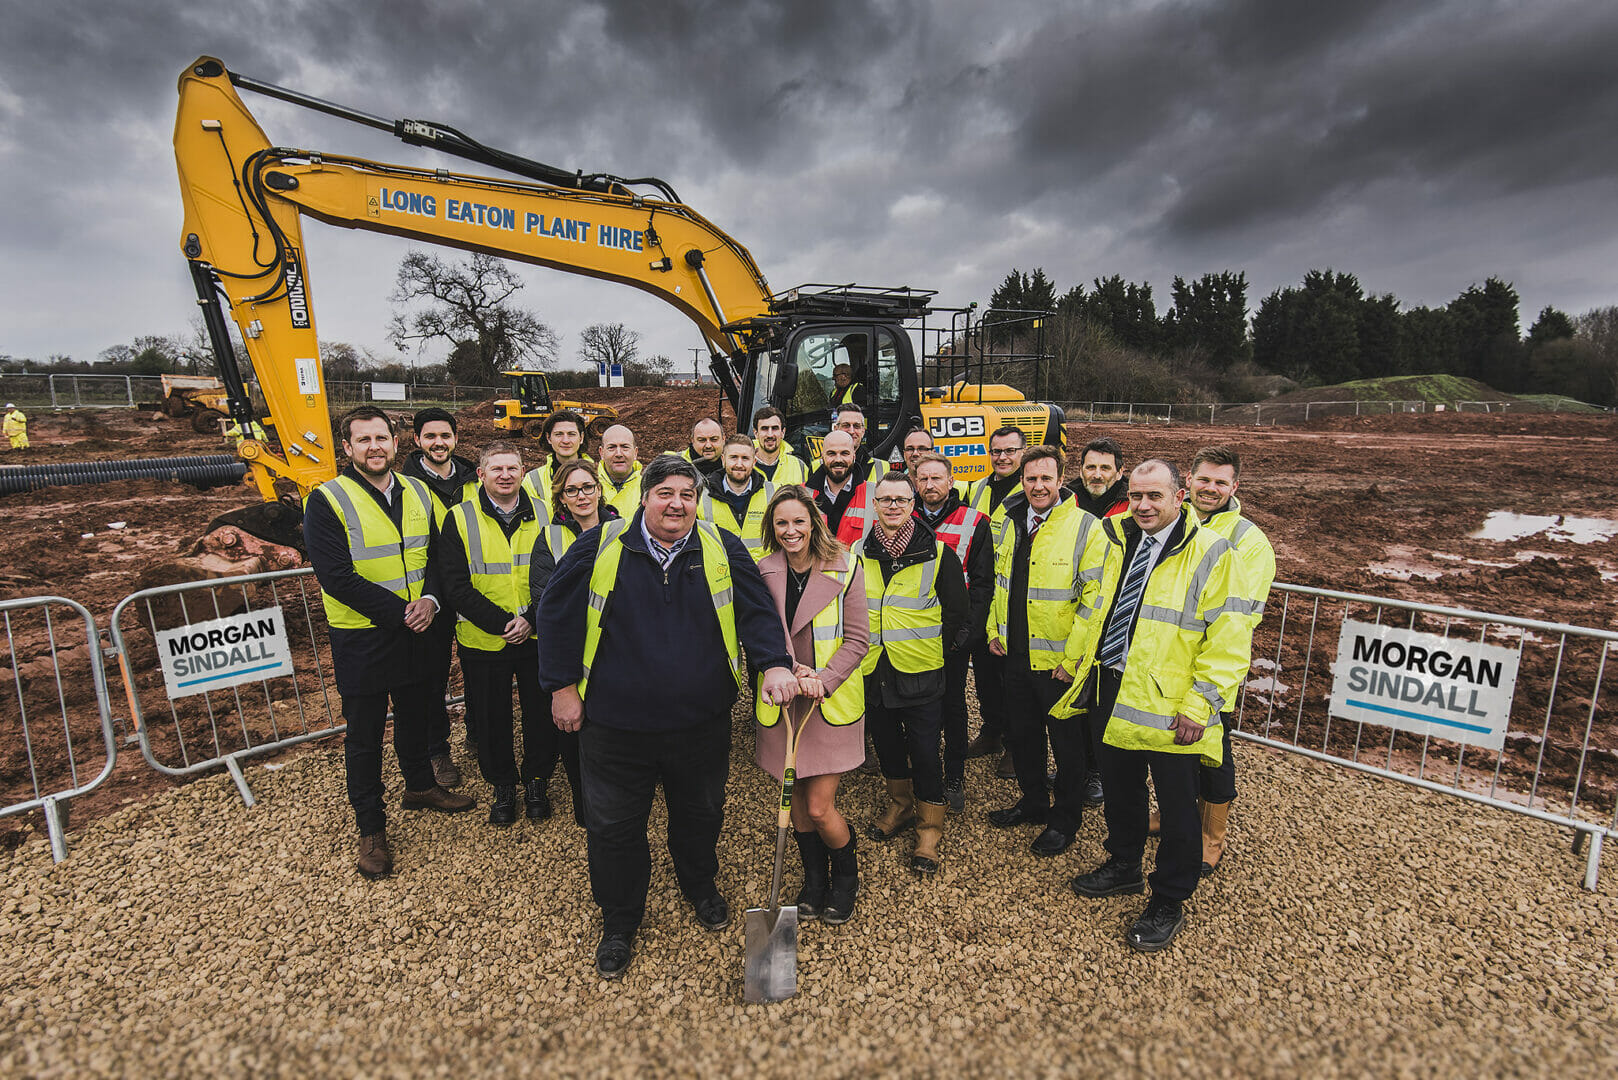 MORGAN SINDALL TO DELIVER FLAGSHIP SUNESIS MOSAIC PRIMARY SCHOOL